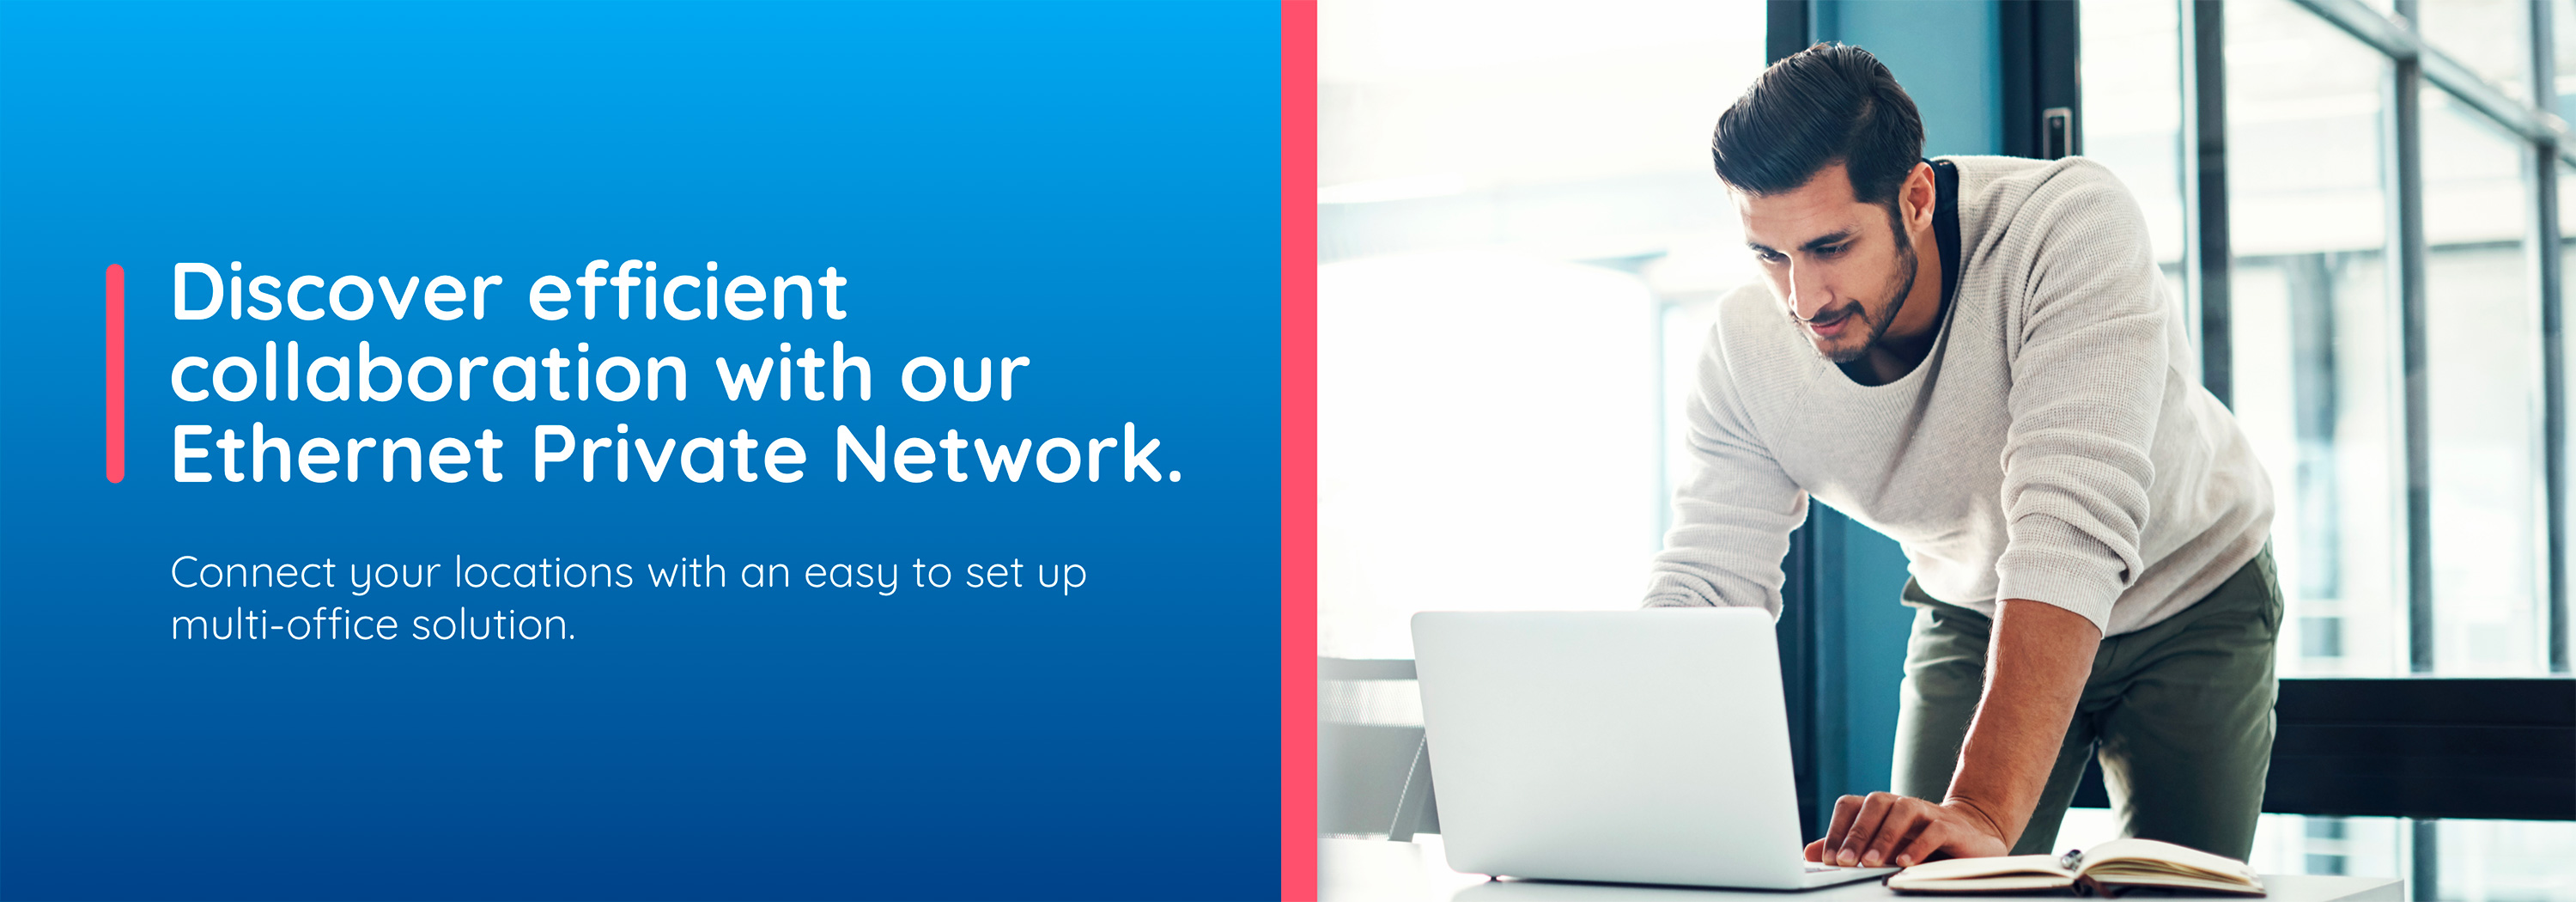 Discover efficient collaboration with our Ethernet Private Network. Connect your locations with an easy to set up multi-office solution.